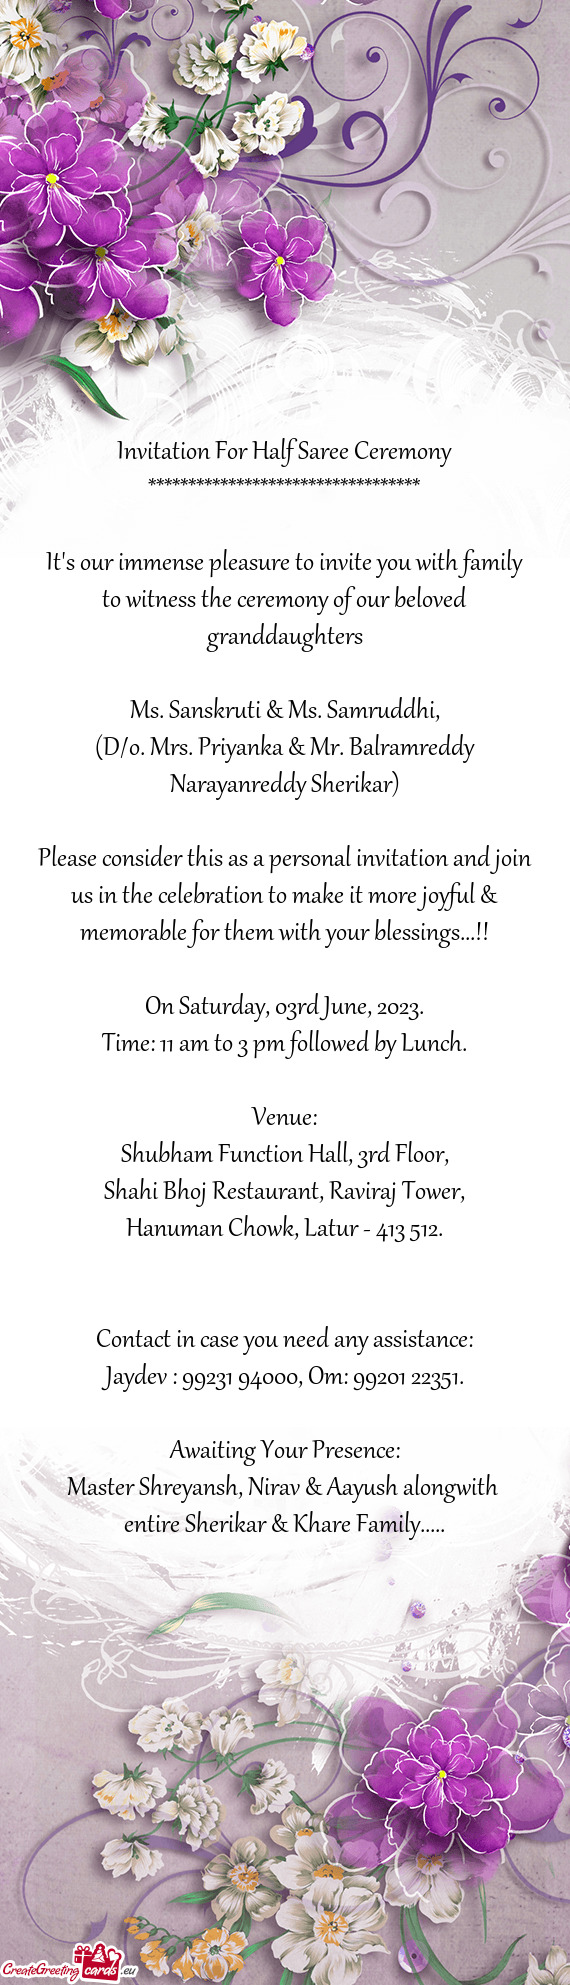 Please consider this as a personal invitation and join us in the celebration to make it more joyful